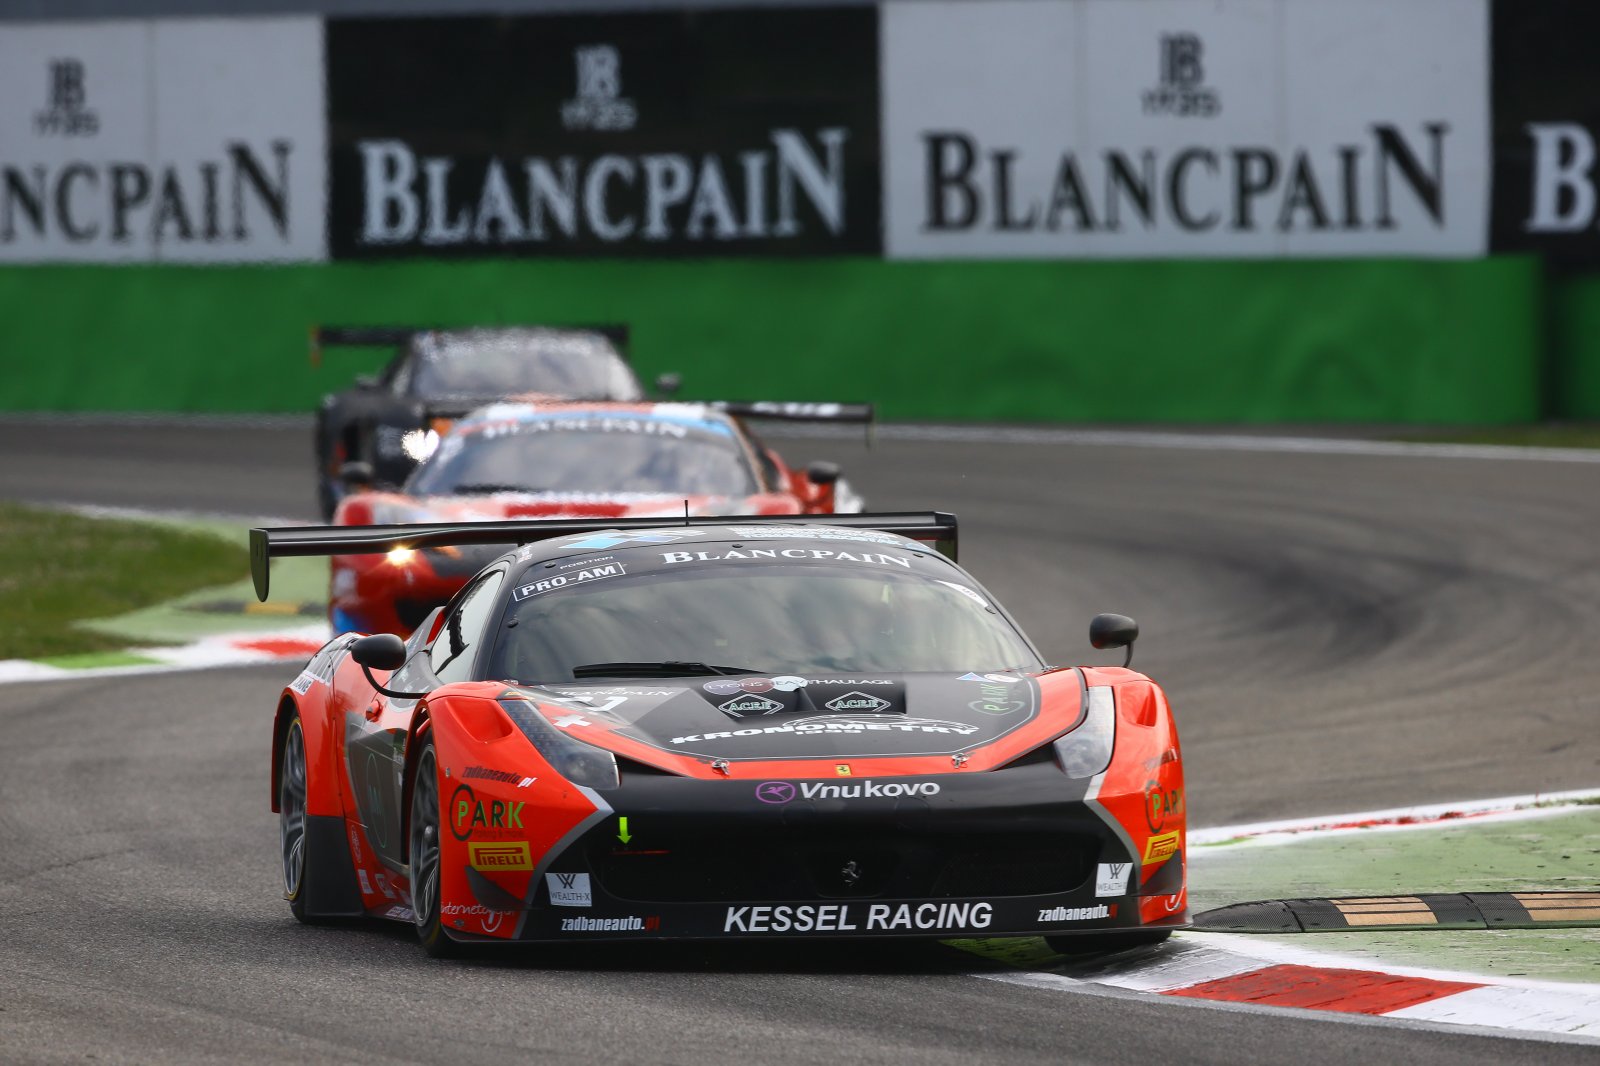 Experience Blancpain Gt Series Everywhere With New App Fanatec Gt World Challenge Europe Powered By Aws